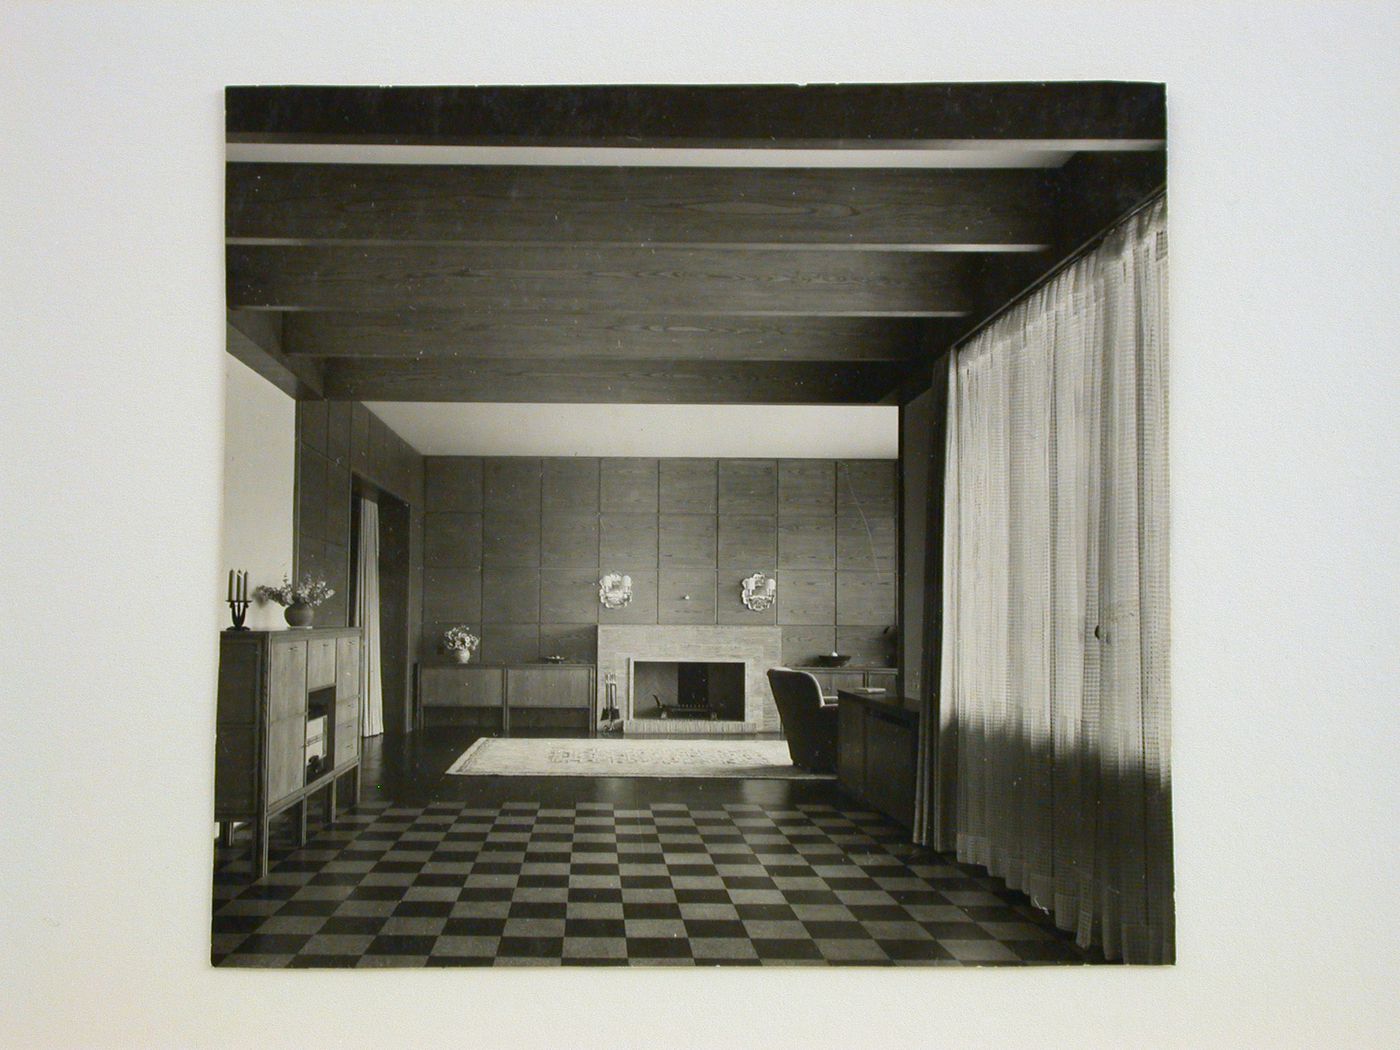 Interior view of hallway and fireplace of Haus H.B., Minden, Germany